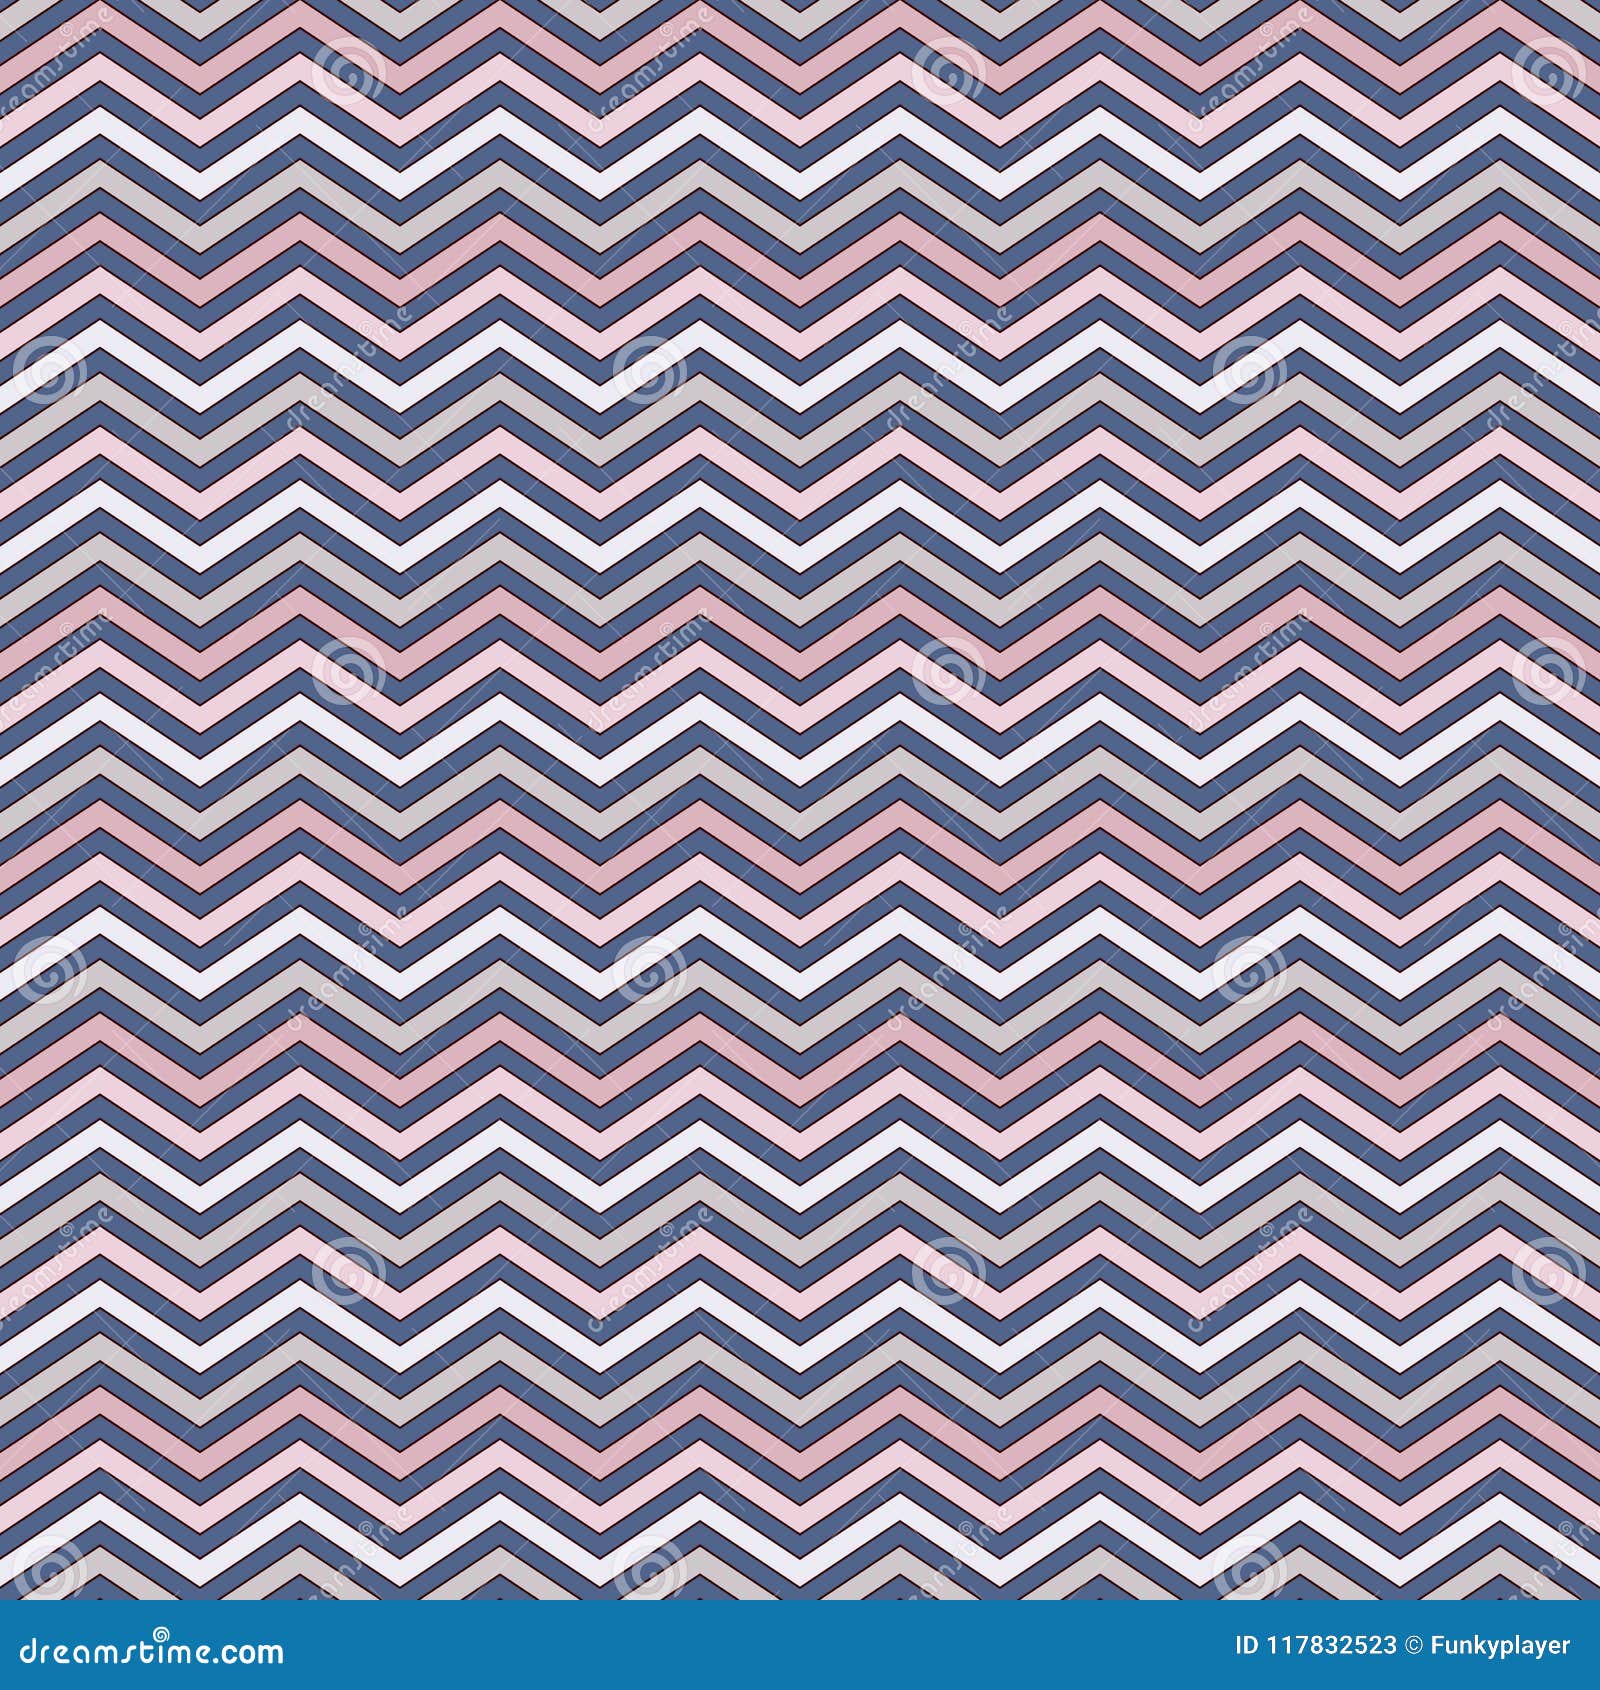 T Shirts Horizontal Zigzags Chevron Pattern in Dark and Light Colors Geometrical 